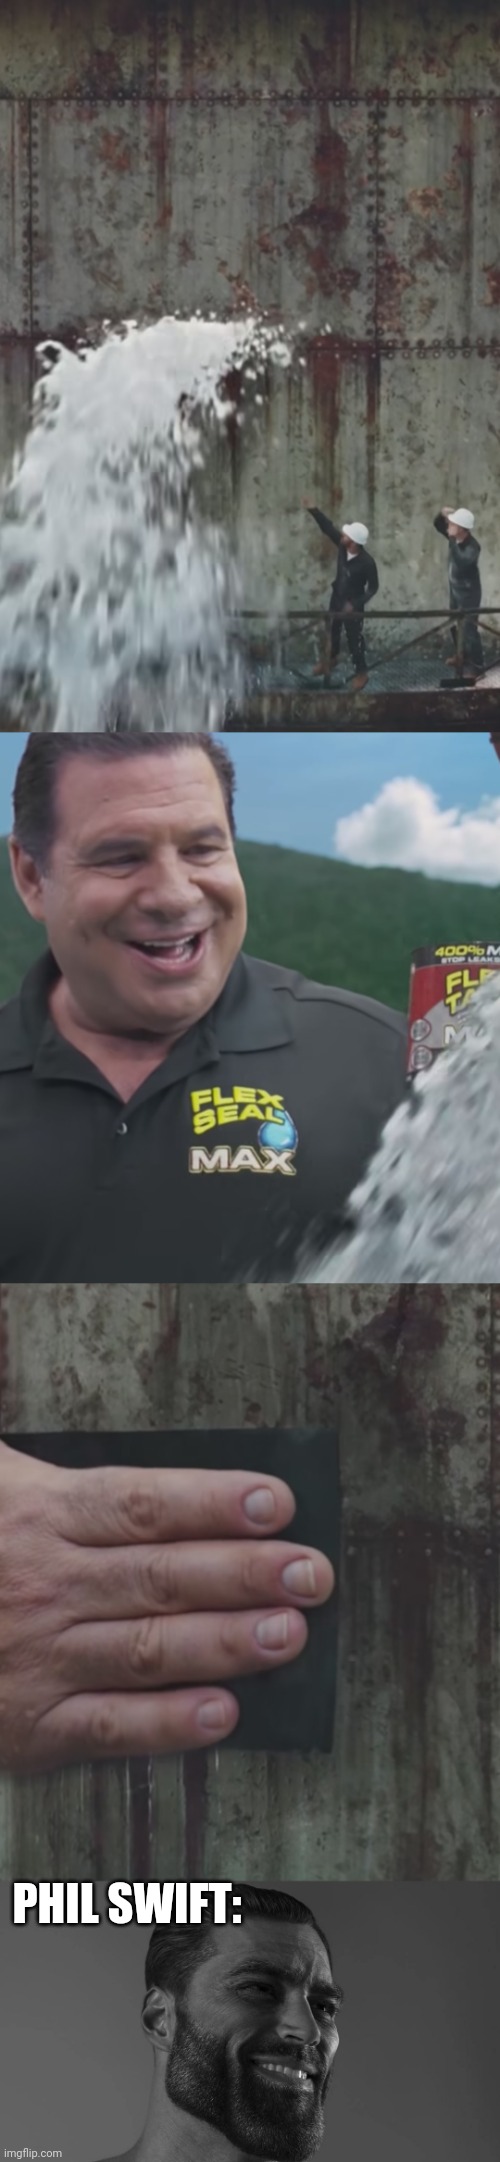 He flex taped my emotonal damage | PHIL SWIFT: | image tagged in gigachad,memes,funny,flex tape,phil swift,laughing | made w/ Imgflip meme maker